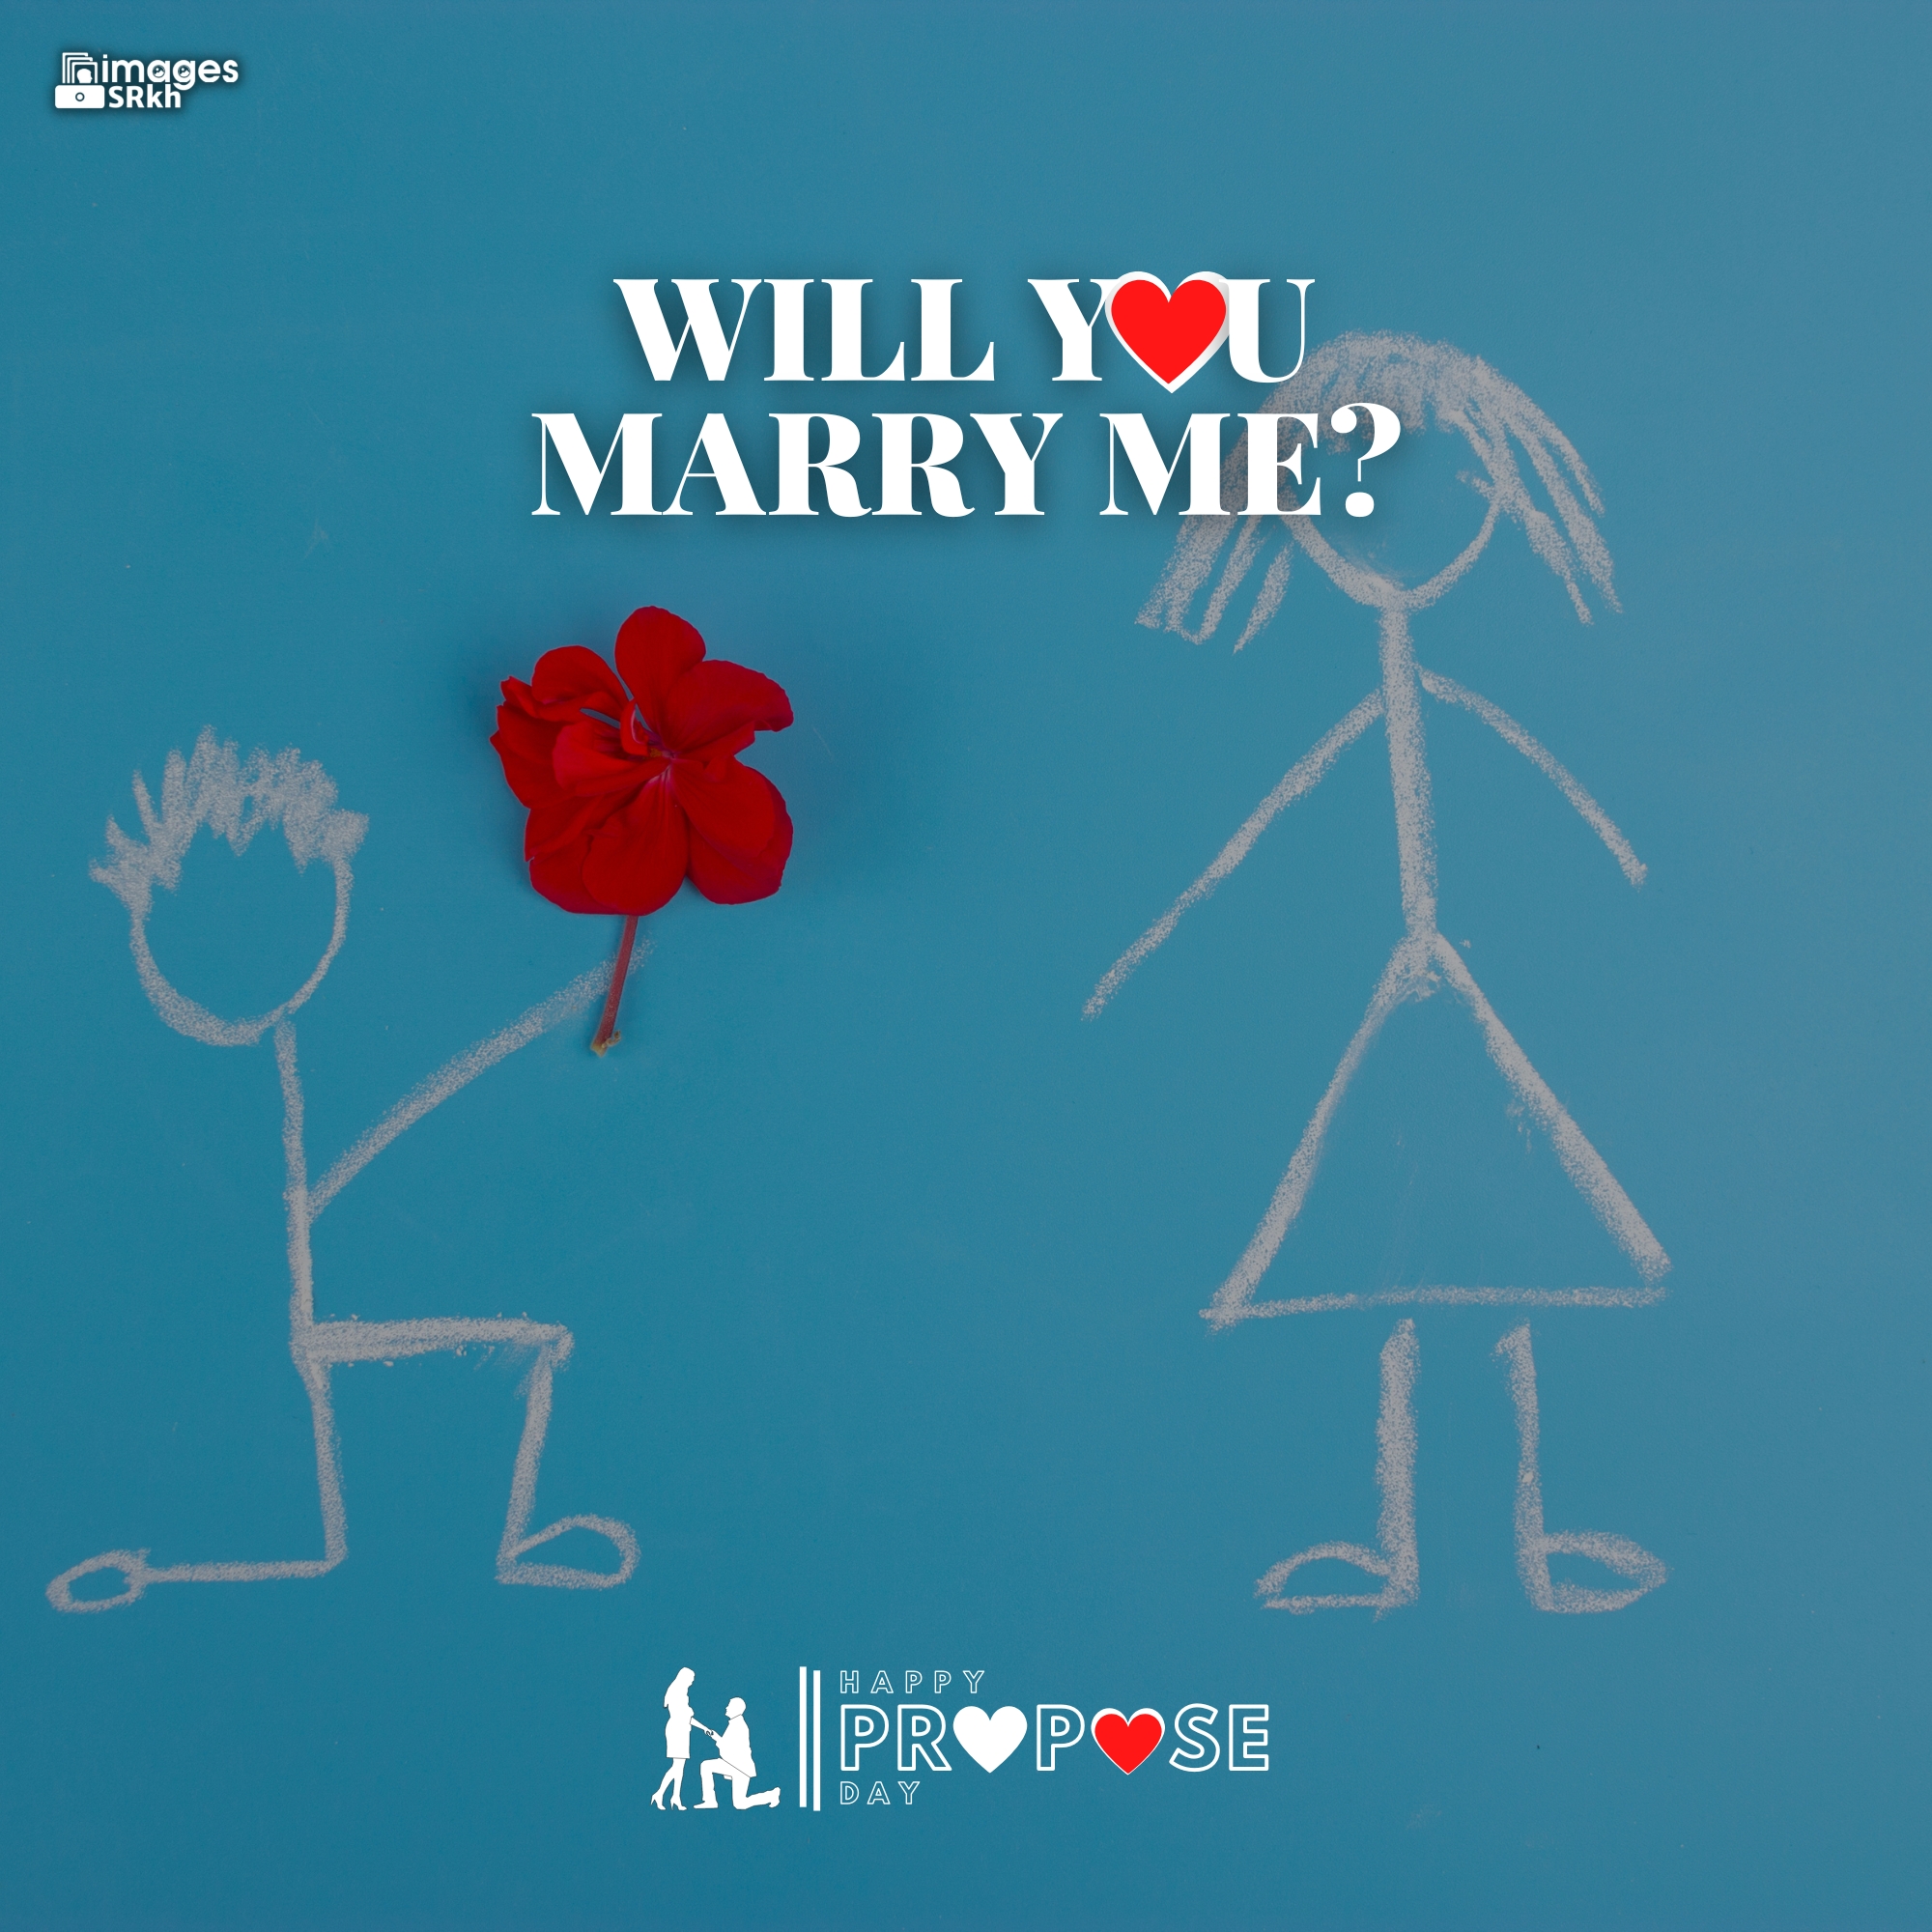 Propose Day Images | 289 | Will You MARRY ME